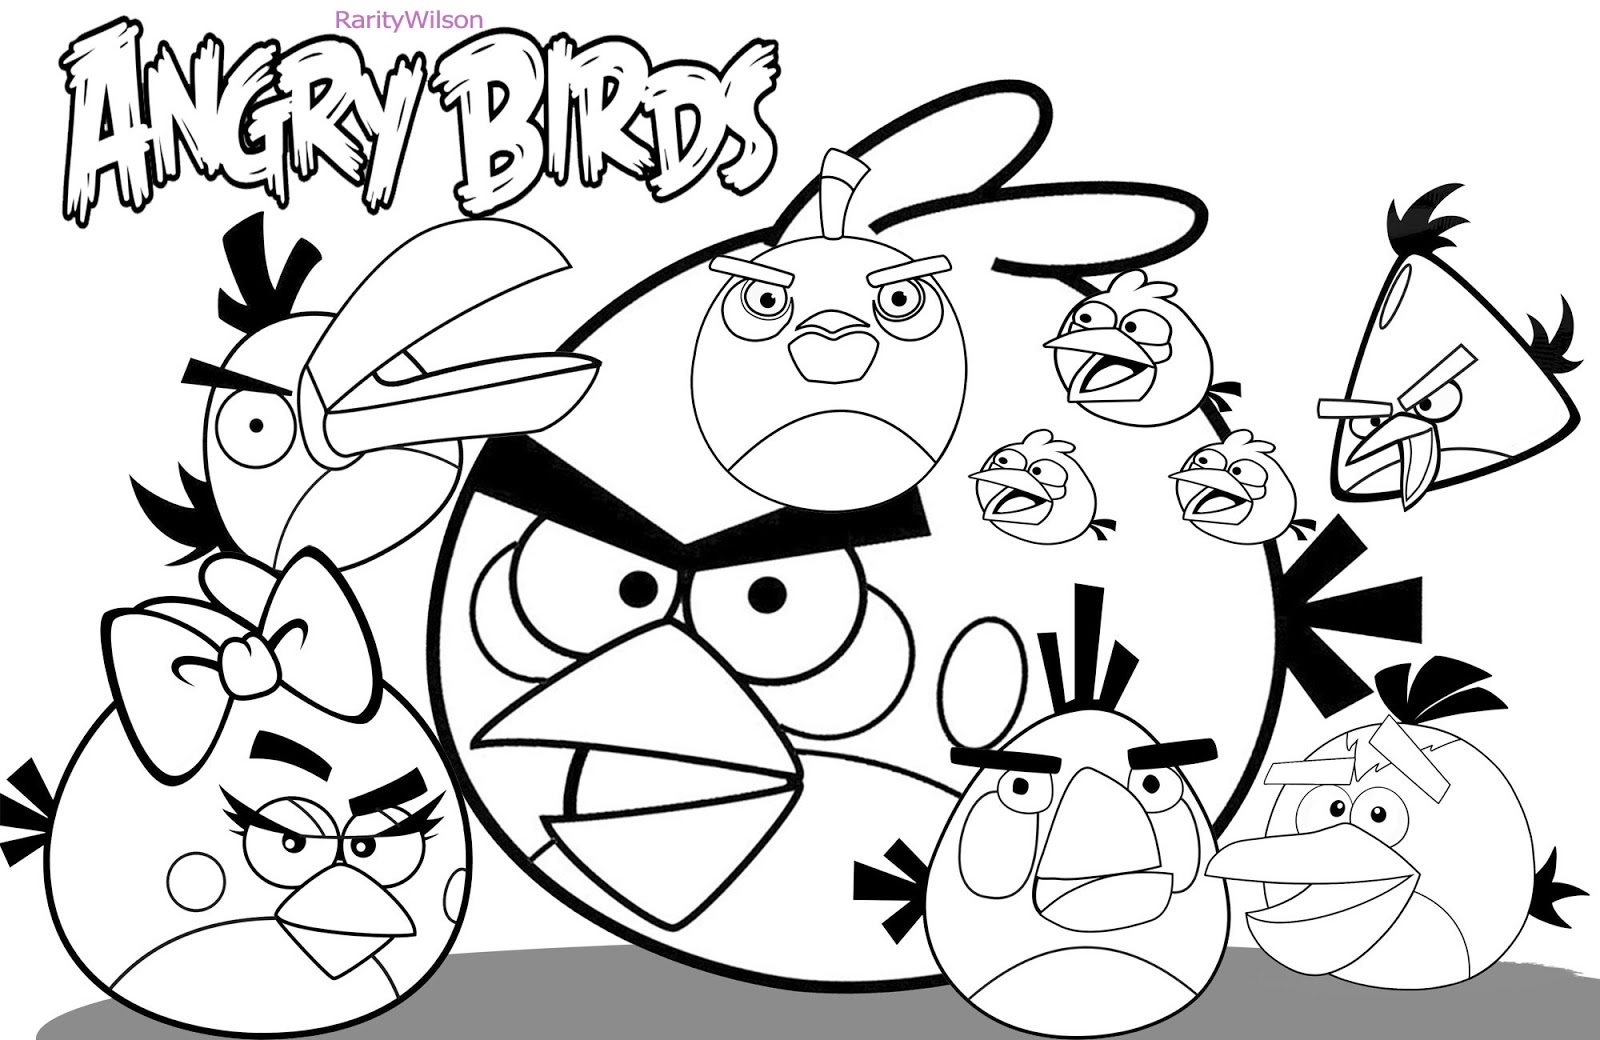 Personalized Party Invites News - Angry Birds Free Printable 